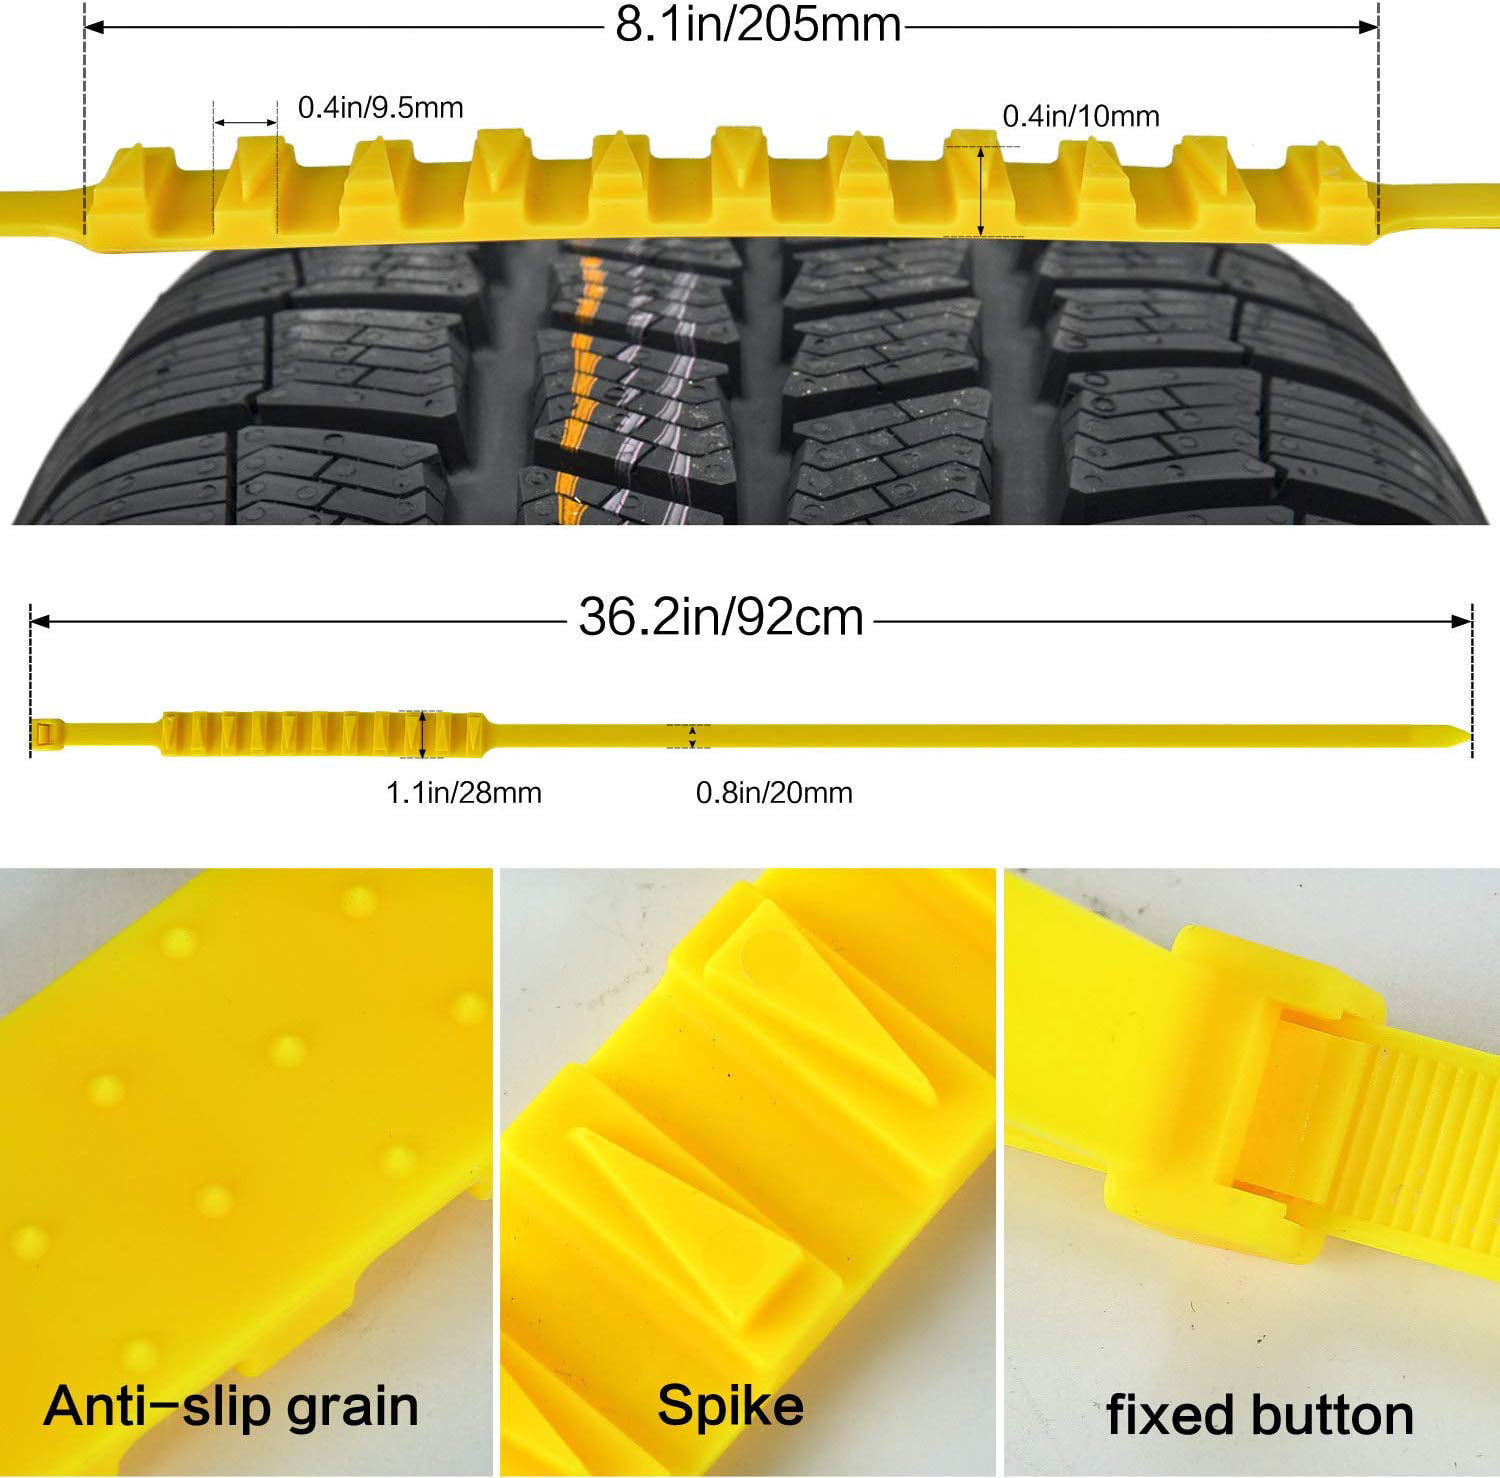 DZS Elec 10pcs Universal Snow Tire Chain 20x900mm Anti-Skid Tie Mud Land Extrication Chain for Winter Driving Muddy Road 